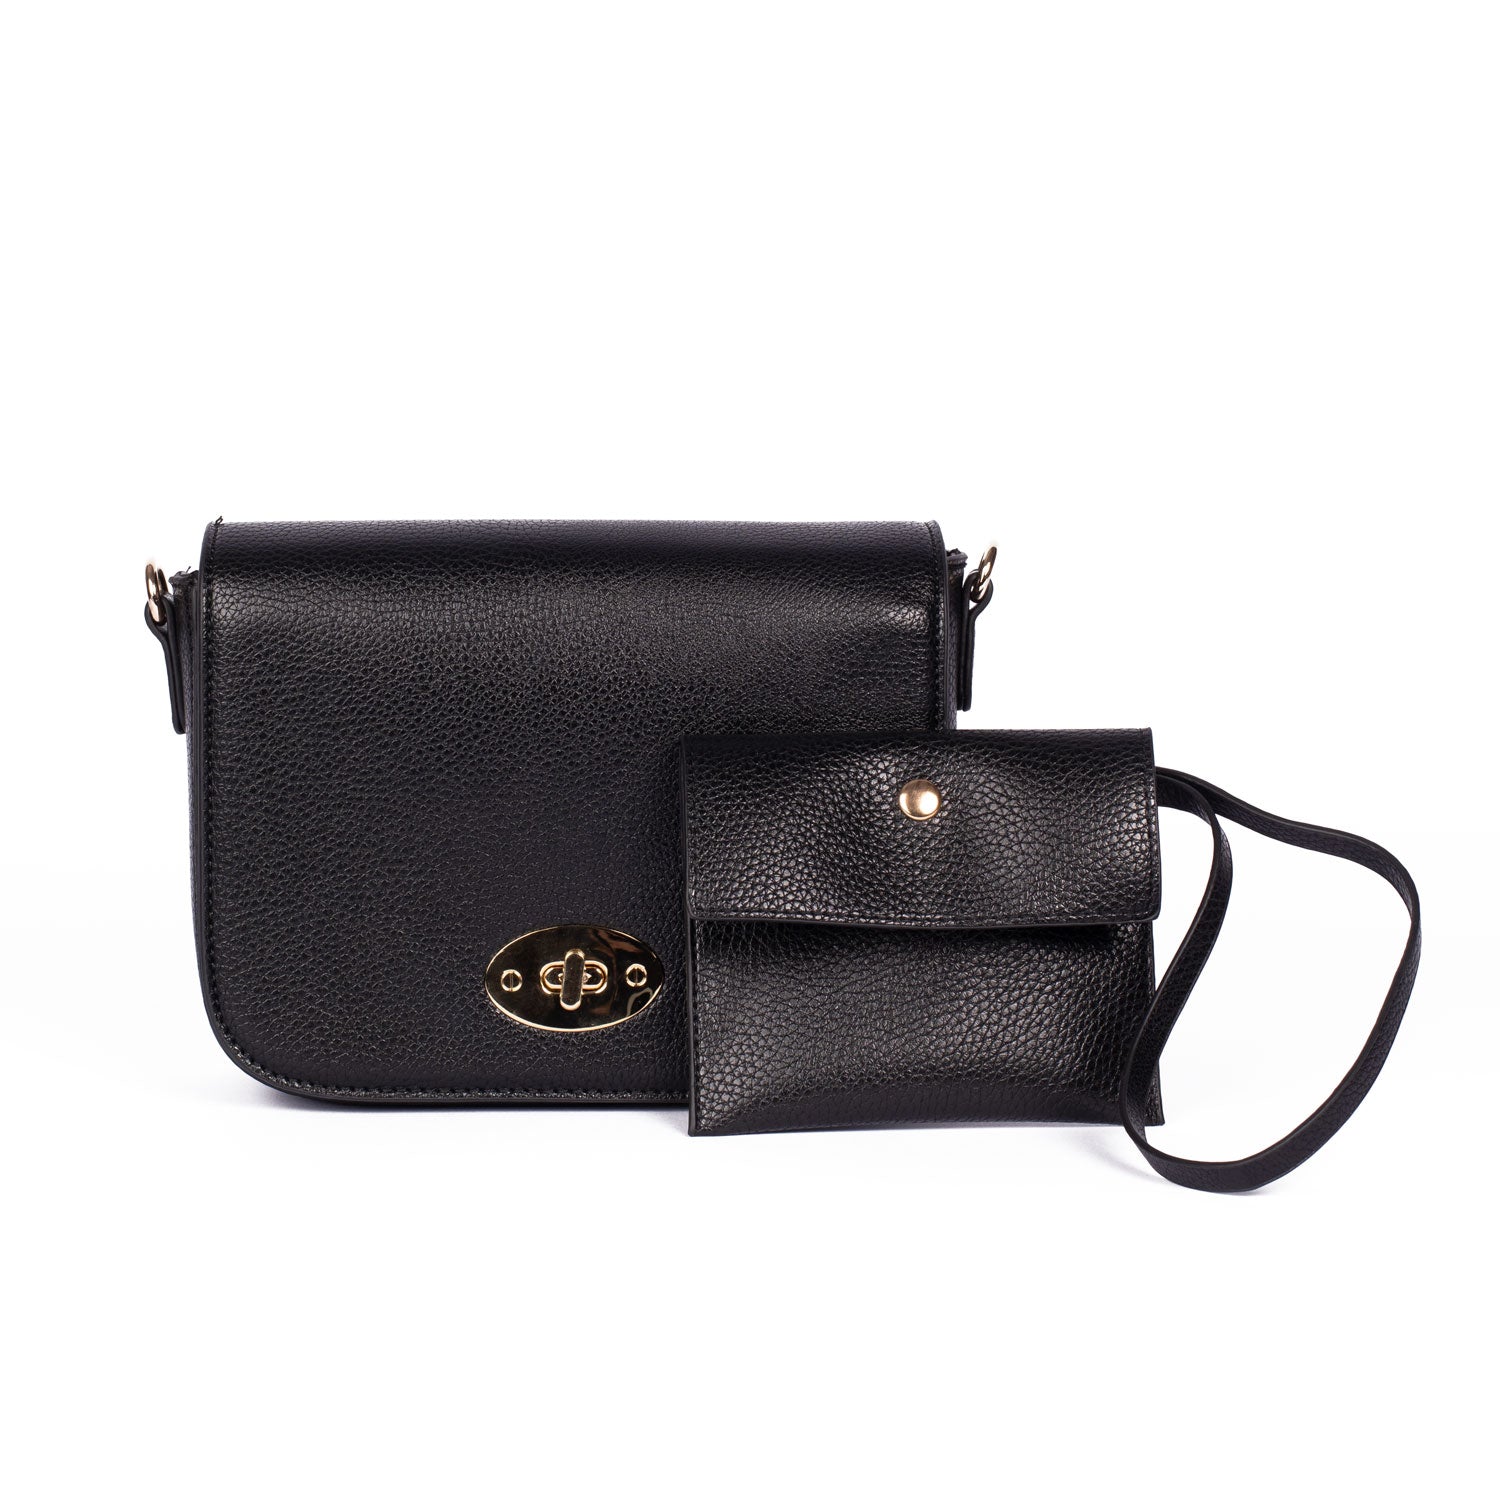 MULBERRY - Grained leather small continental wallet | Selfridges.com